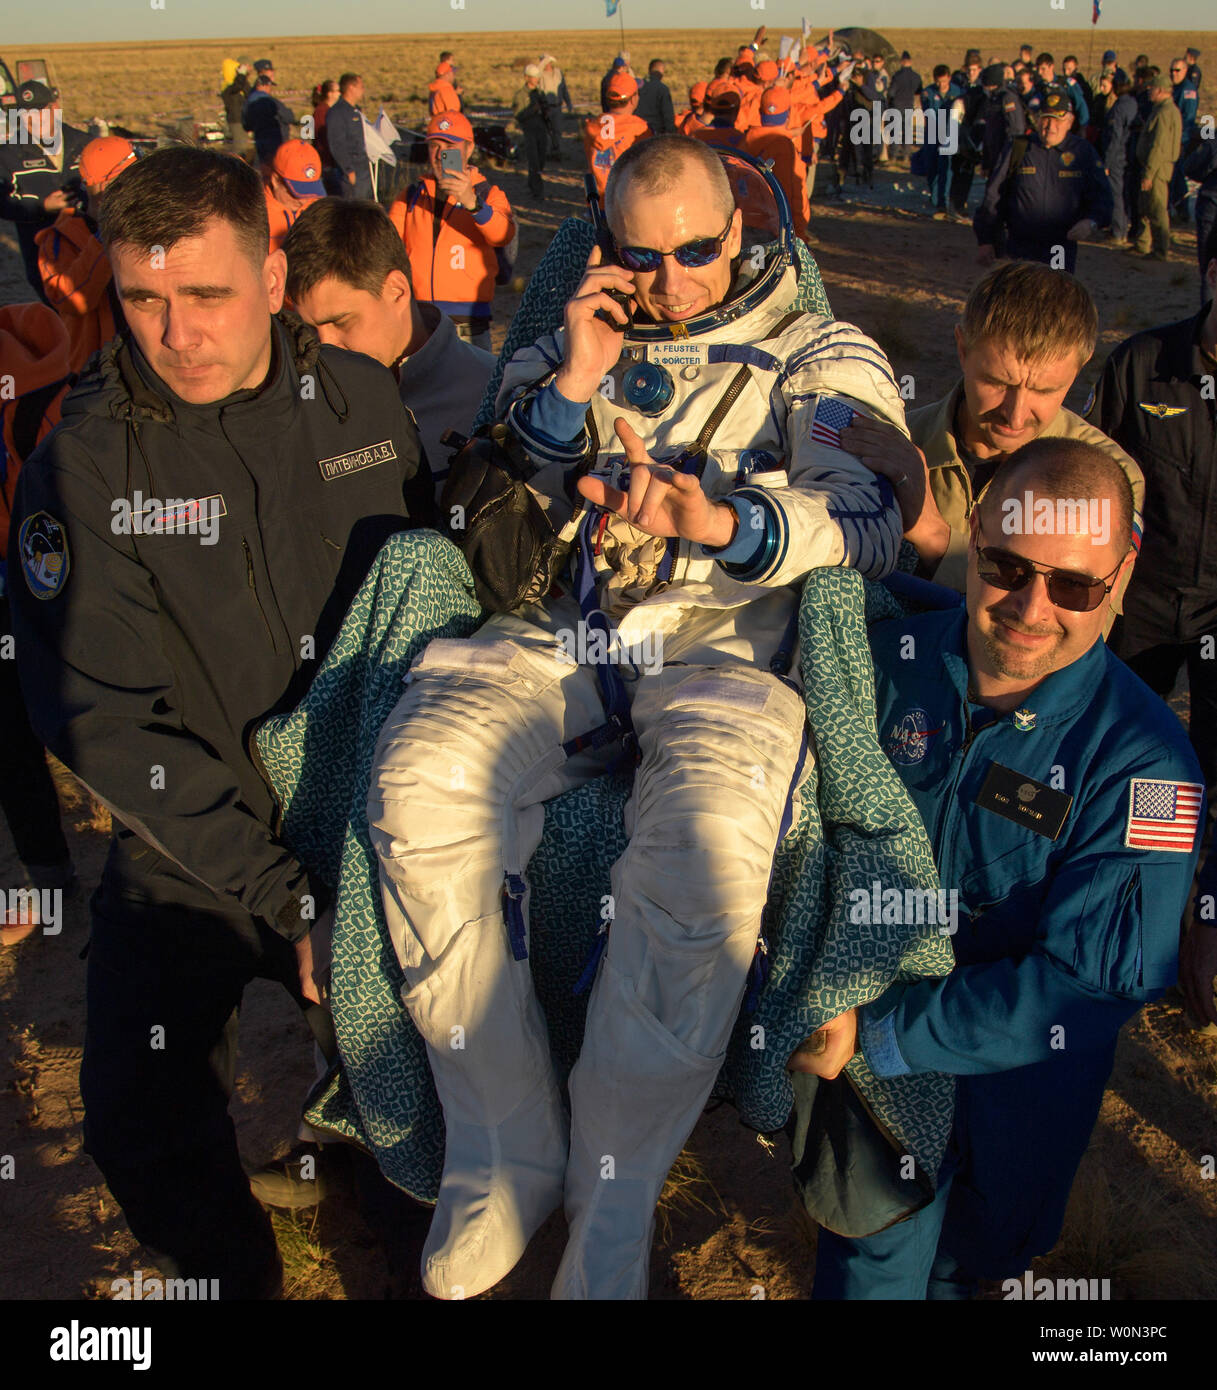 Expedition 56 Commander Drew Feustel of NASA is carried to a medical tent shortly after he, Expedition 56 Flight Engineer Ricky Arnold of NASA, and Expedition 56 Flight Engineer and Soyuz Commander Oleg Artemyev of Roscosmos landed in their Soyuz MS-08 spacecraft near the town of Zhezkazgan, Kazakhstan on October 4, 2018. Feustel, Arnold, and Artemyev are returning after 197 days in space where they served as members of the Expedition 55 and 56 crews onboard the International Space Station. NASA Photo by Bill Ingalls/UPI Stock Photo